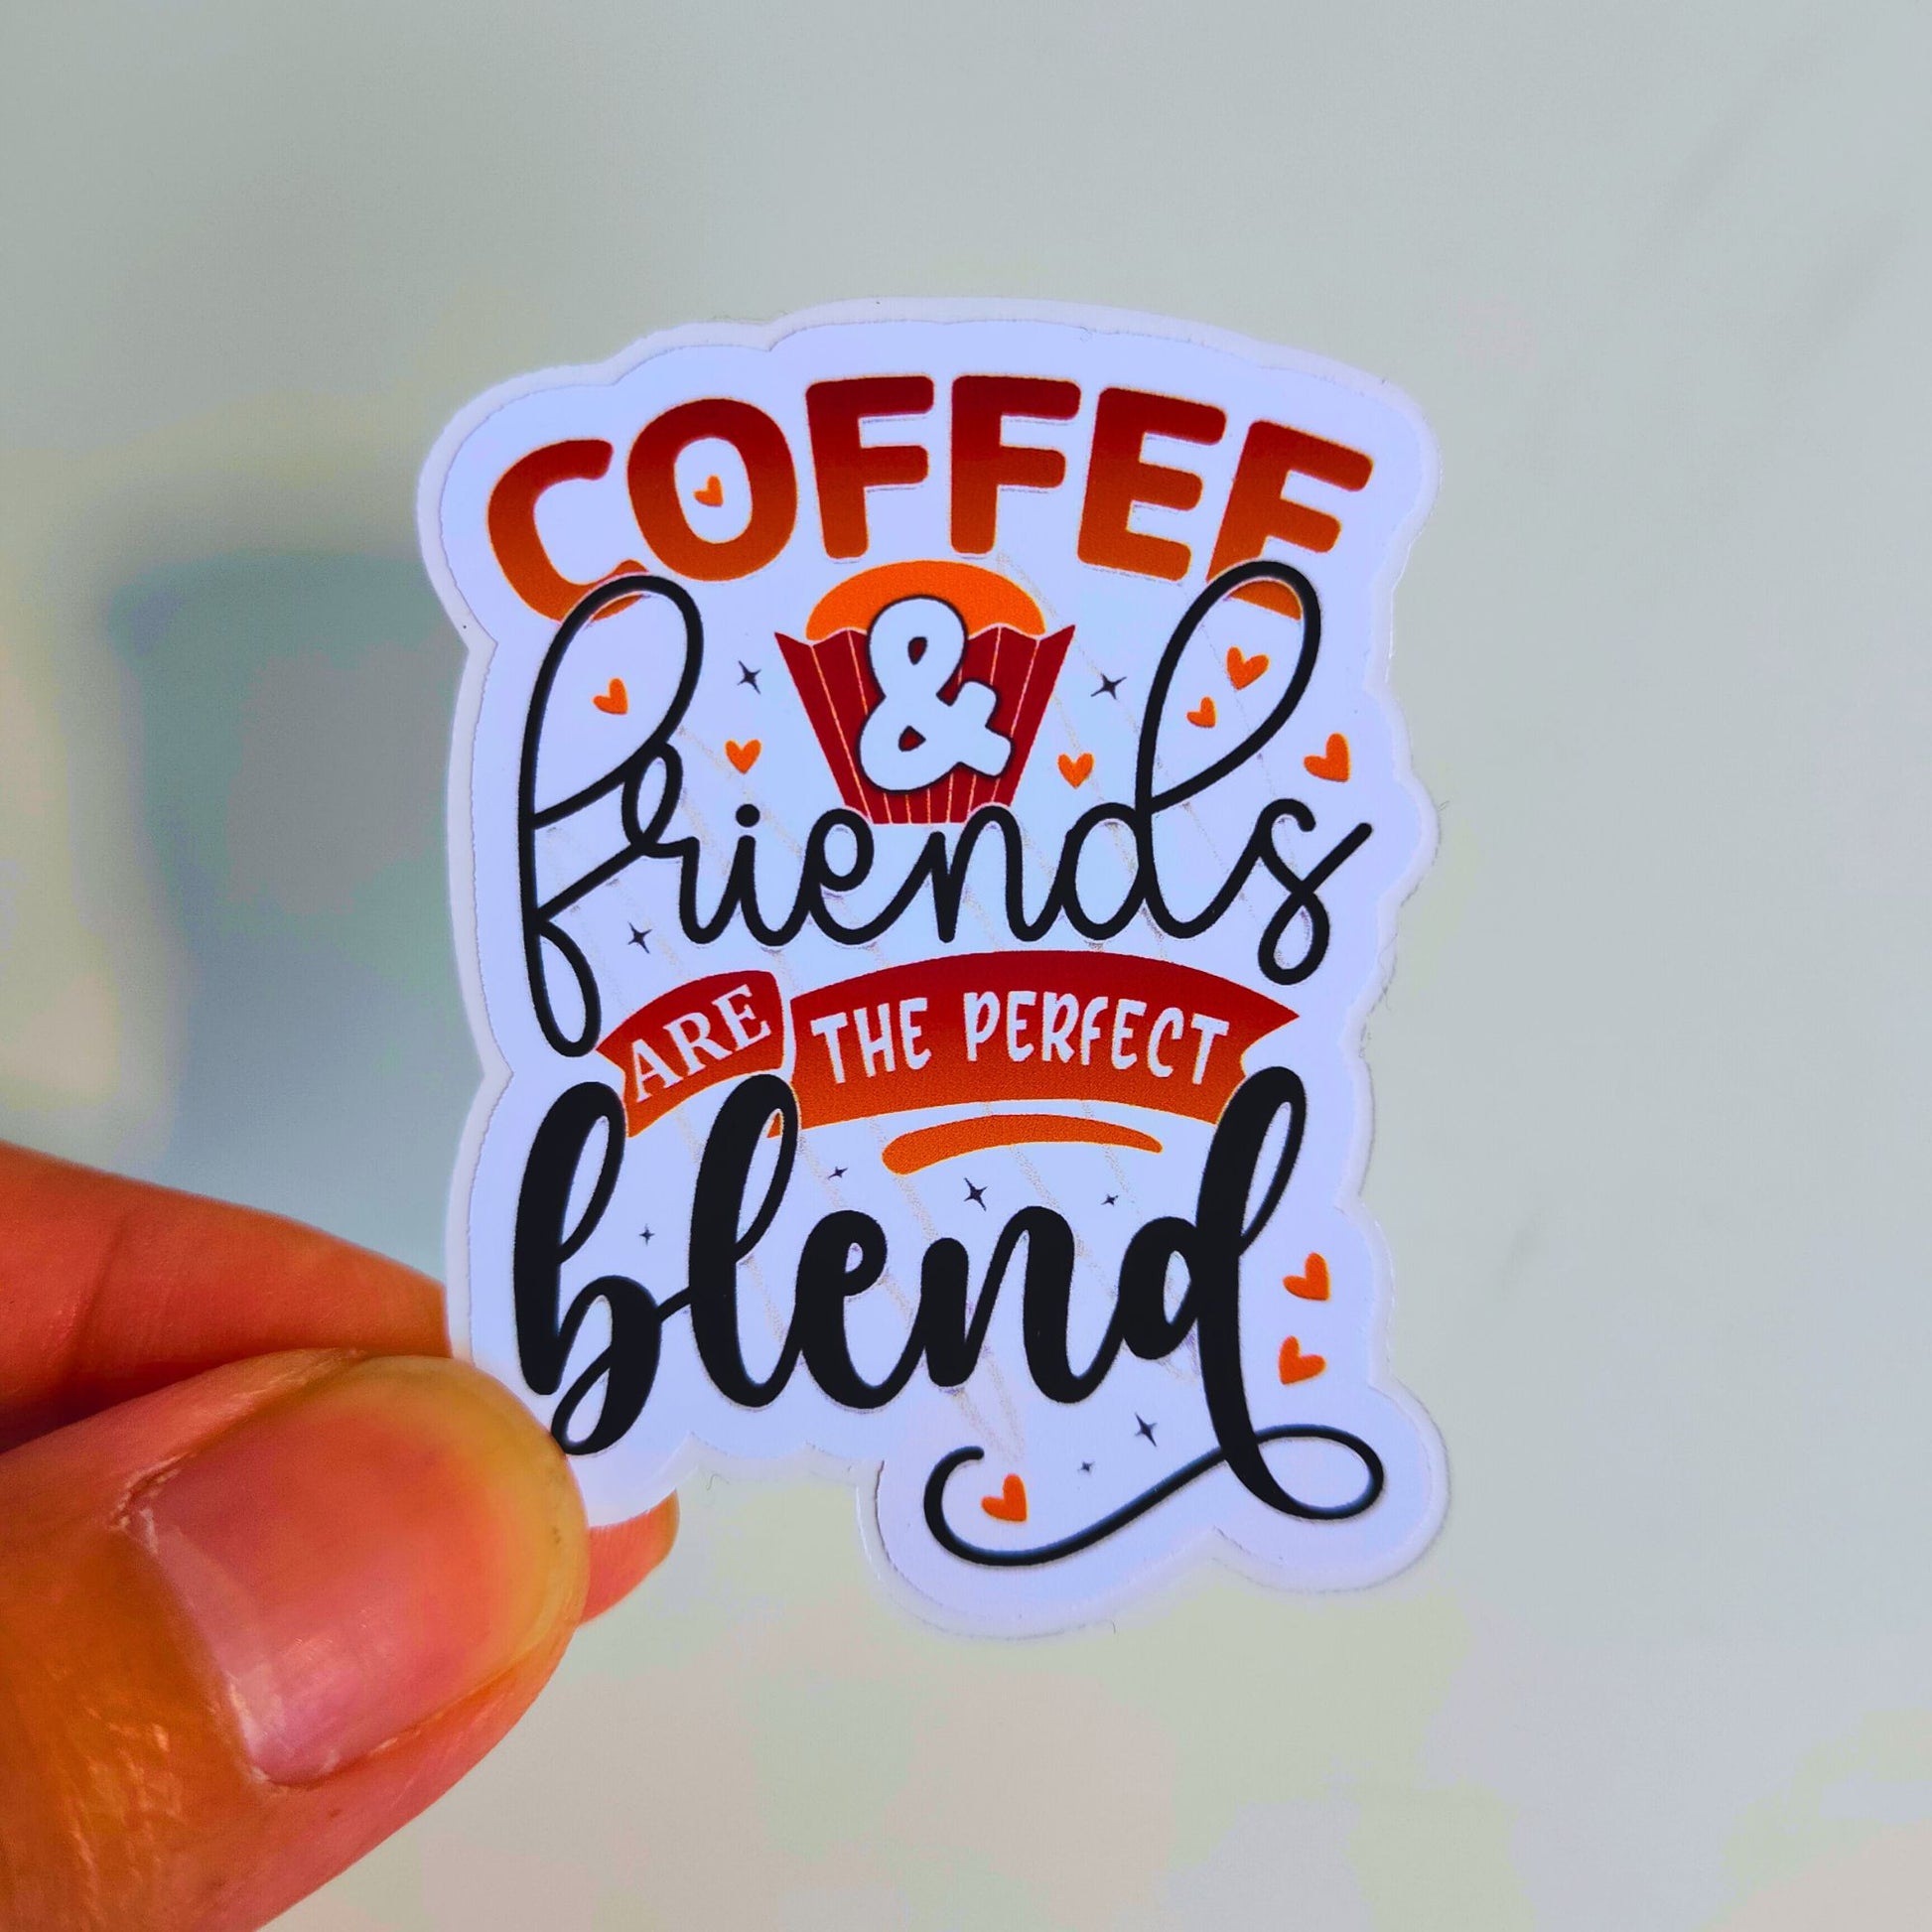 Cofee and friends are the perfect blend.